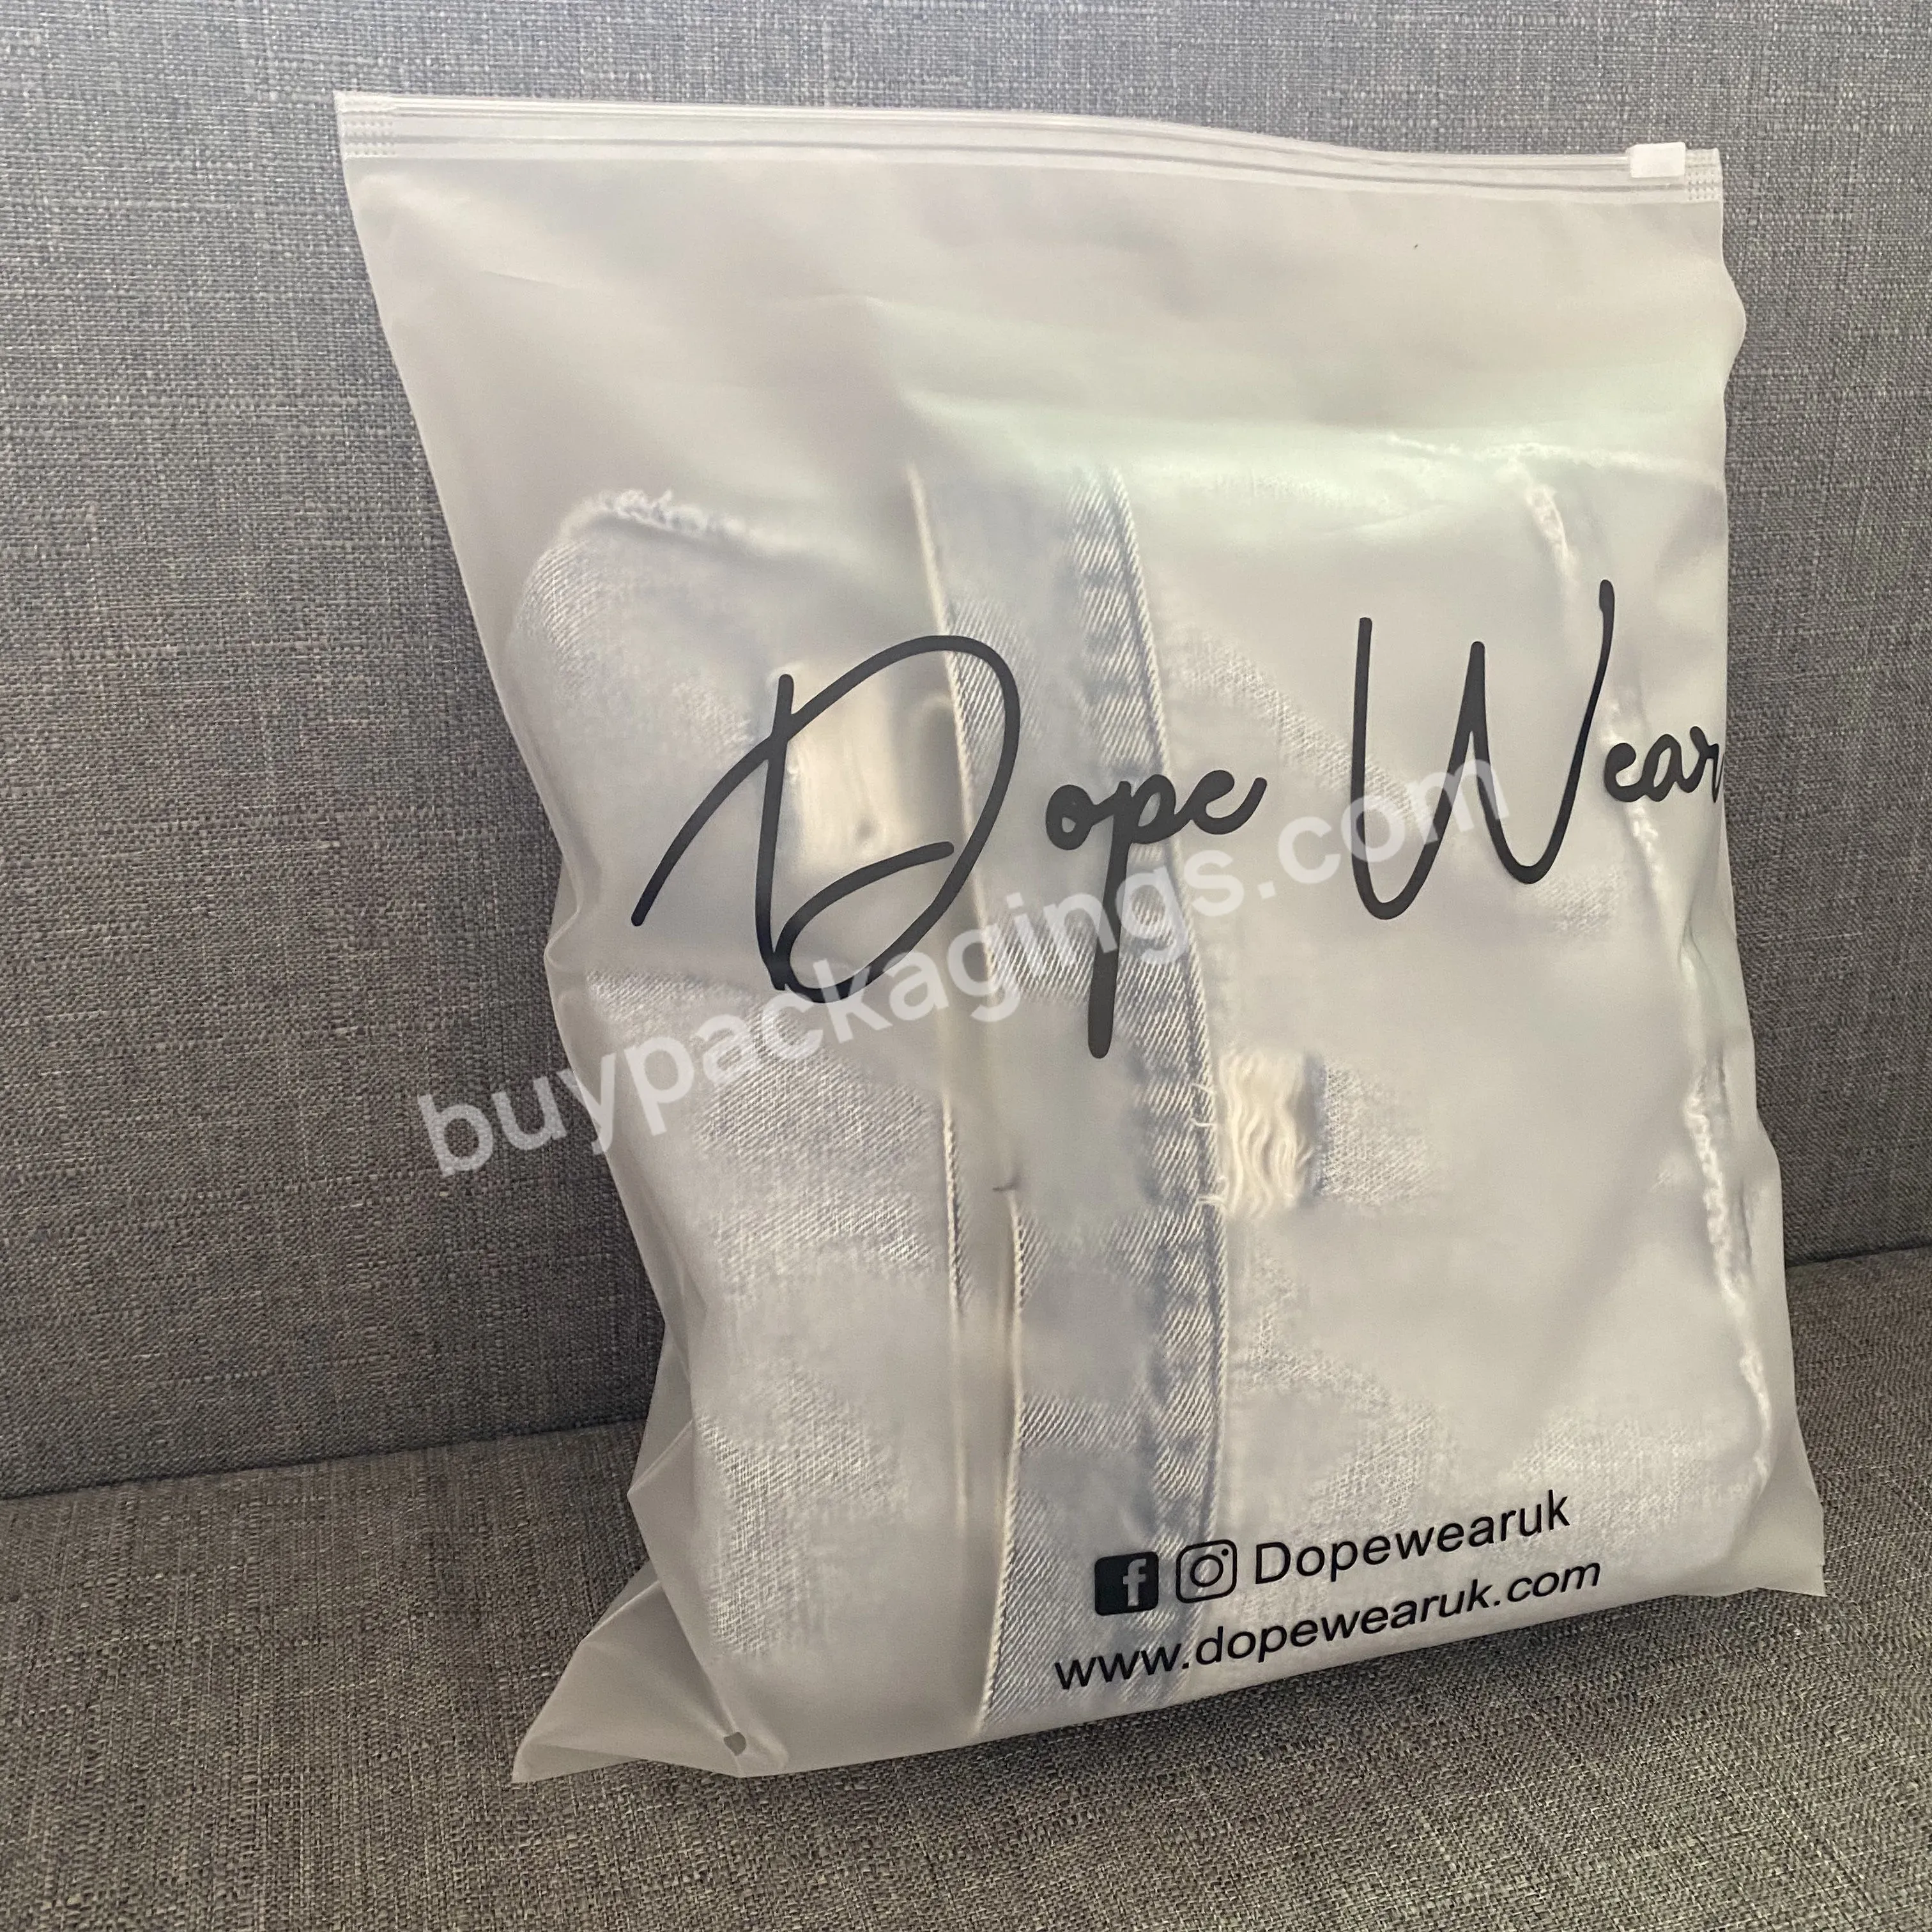 Pe Custom Printed Logo Packaging Bags For Storage Hair Accessories Hair Bands Frosted Zipper Bags - Buy Printed Logo Packaging Bags,Hair Bands Frosted Zipper Bags,Zipper Bags.